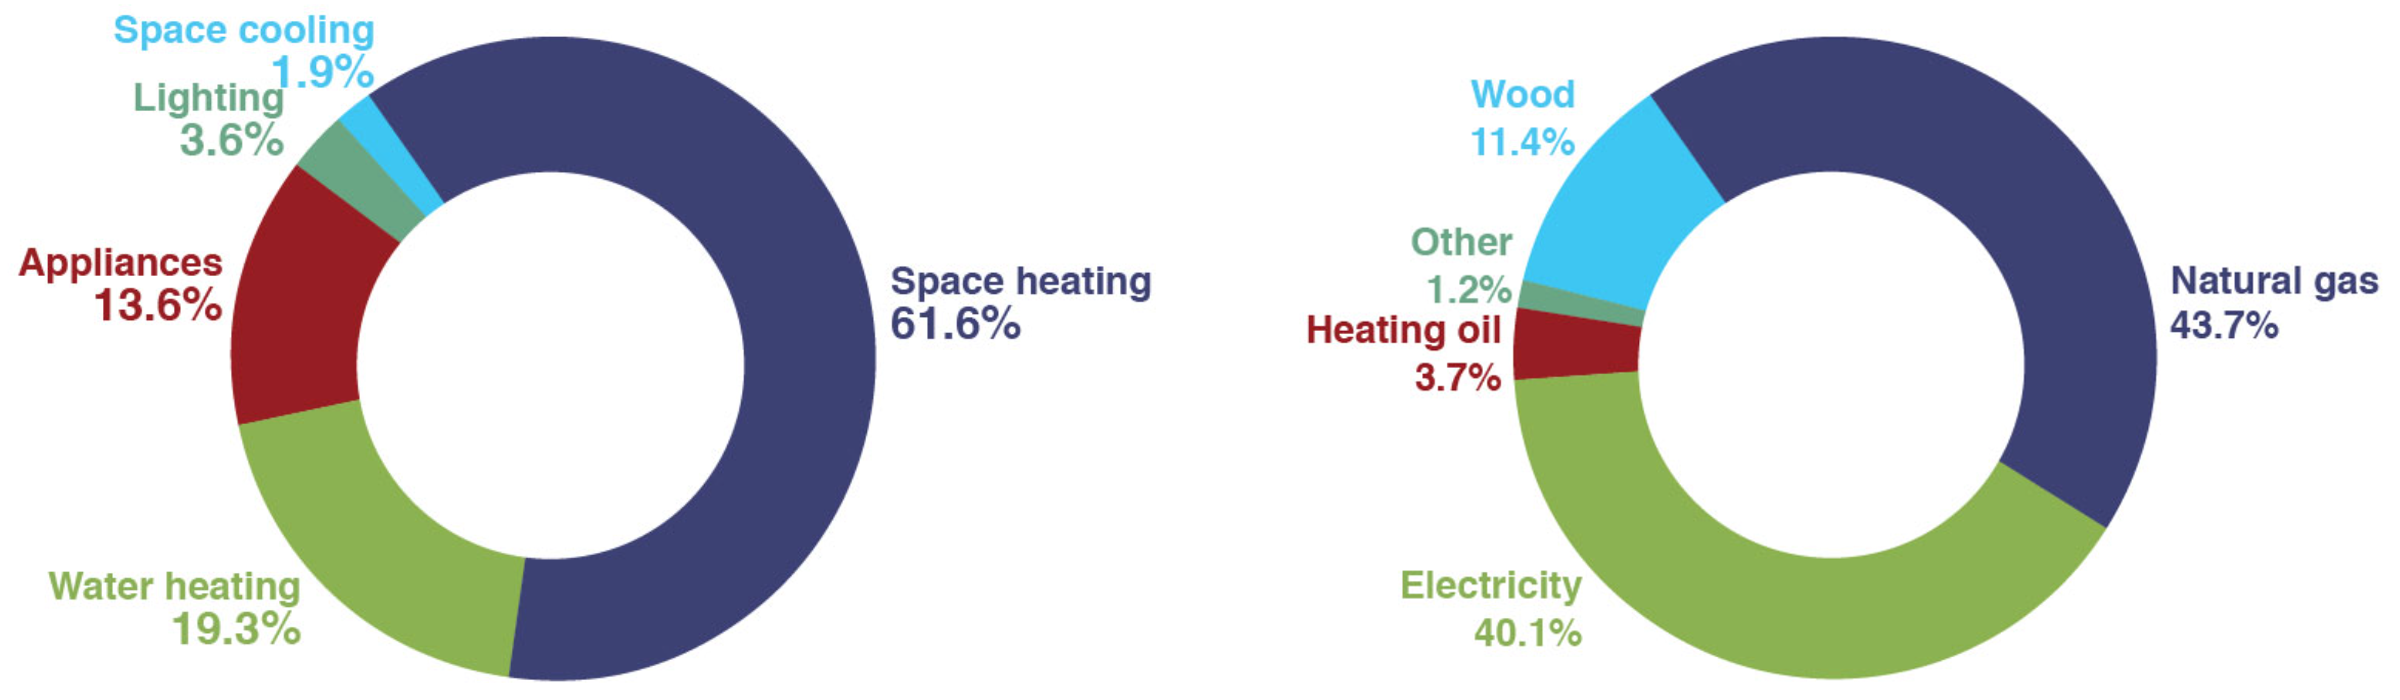 Pie charts of residential emissions